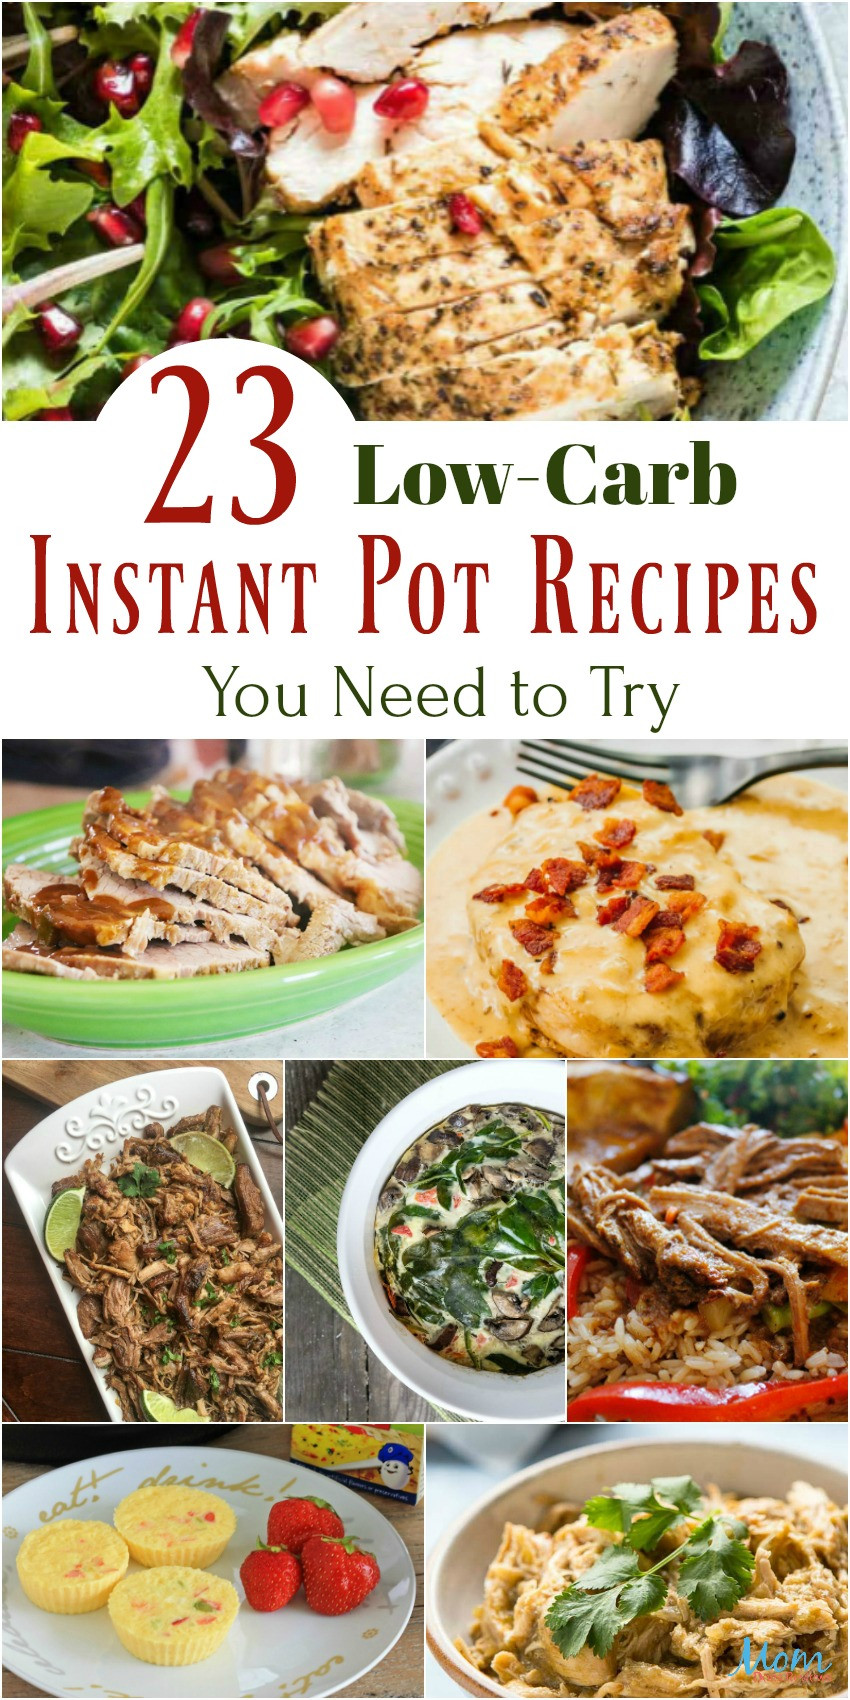 Low Carb Recipes For Instant Pot
 23 Low Carb Instant Pot Recipes You Need to Try Mom Does